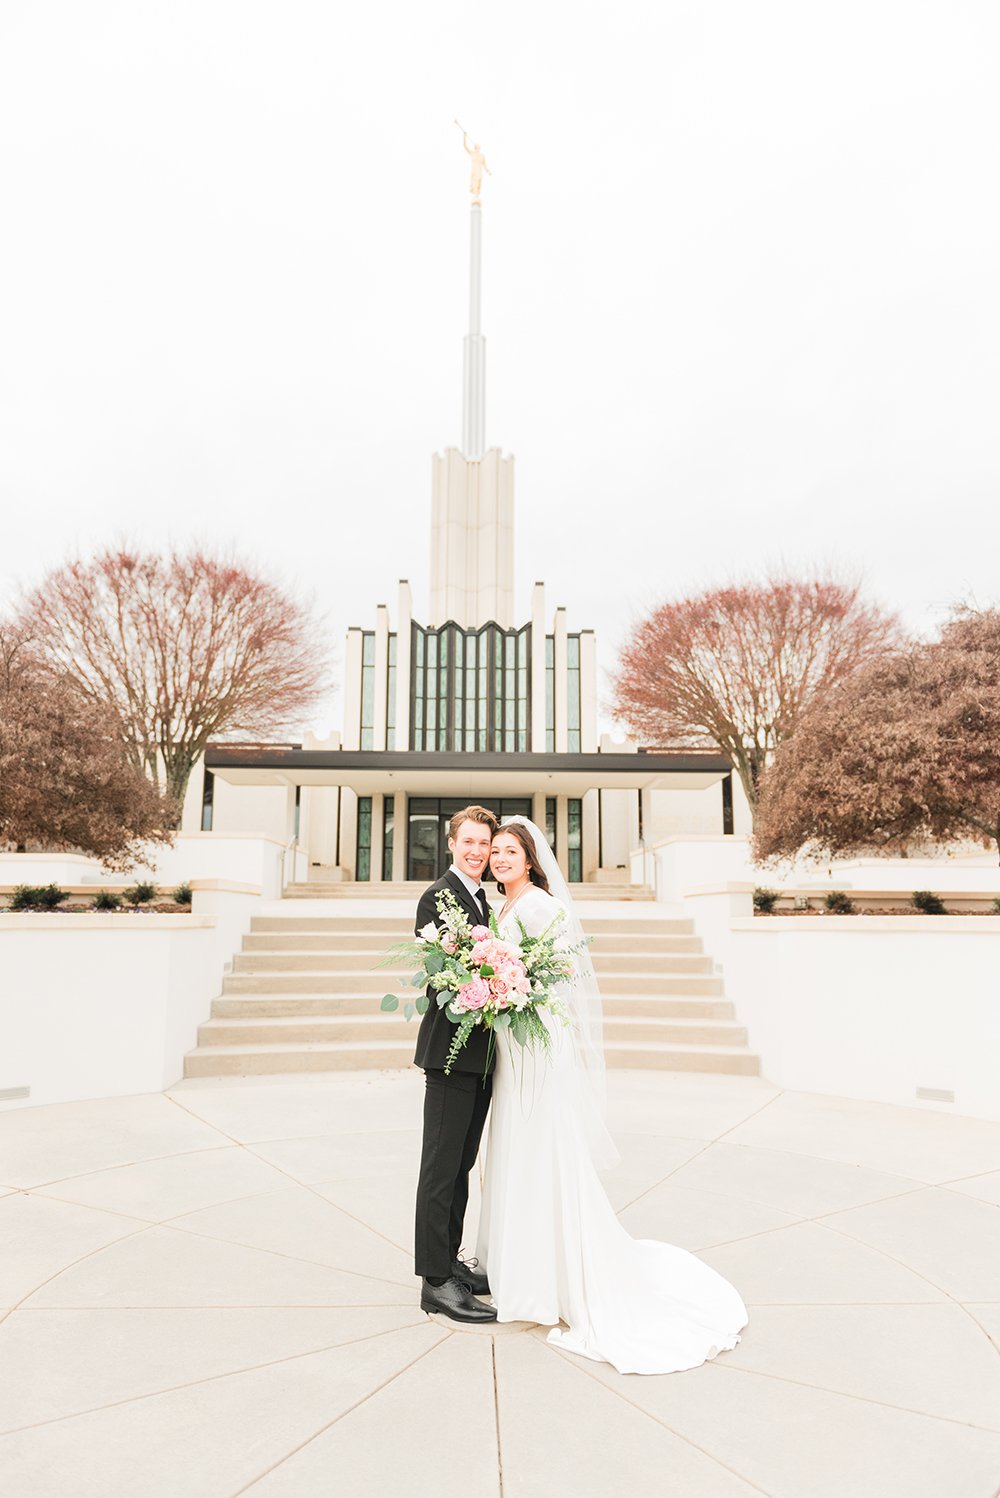  A wide shot of a newlywed couple in front of the Atlanta, Georgia LDS temple. Professional wedding photographer temple wedding pictures#peachtreecity #weddingphotographer #ldsweddings #atlantatemple #jacquieerickson 